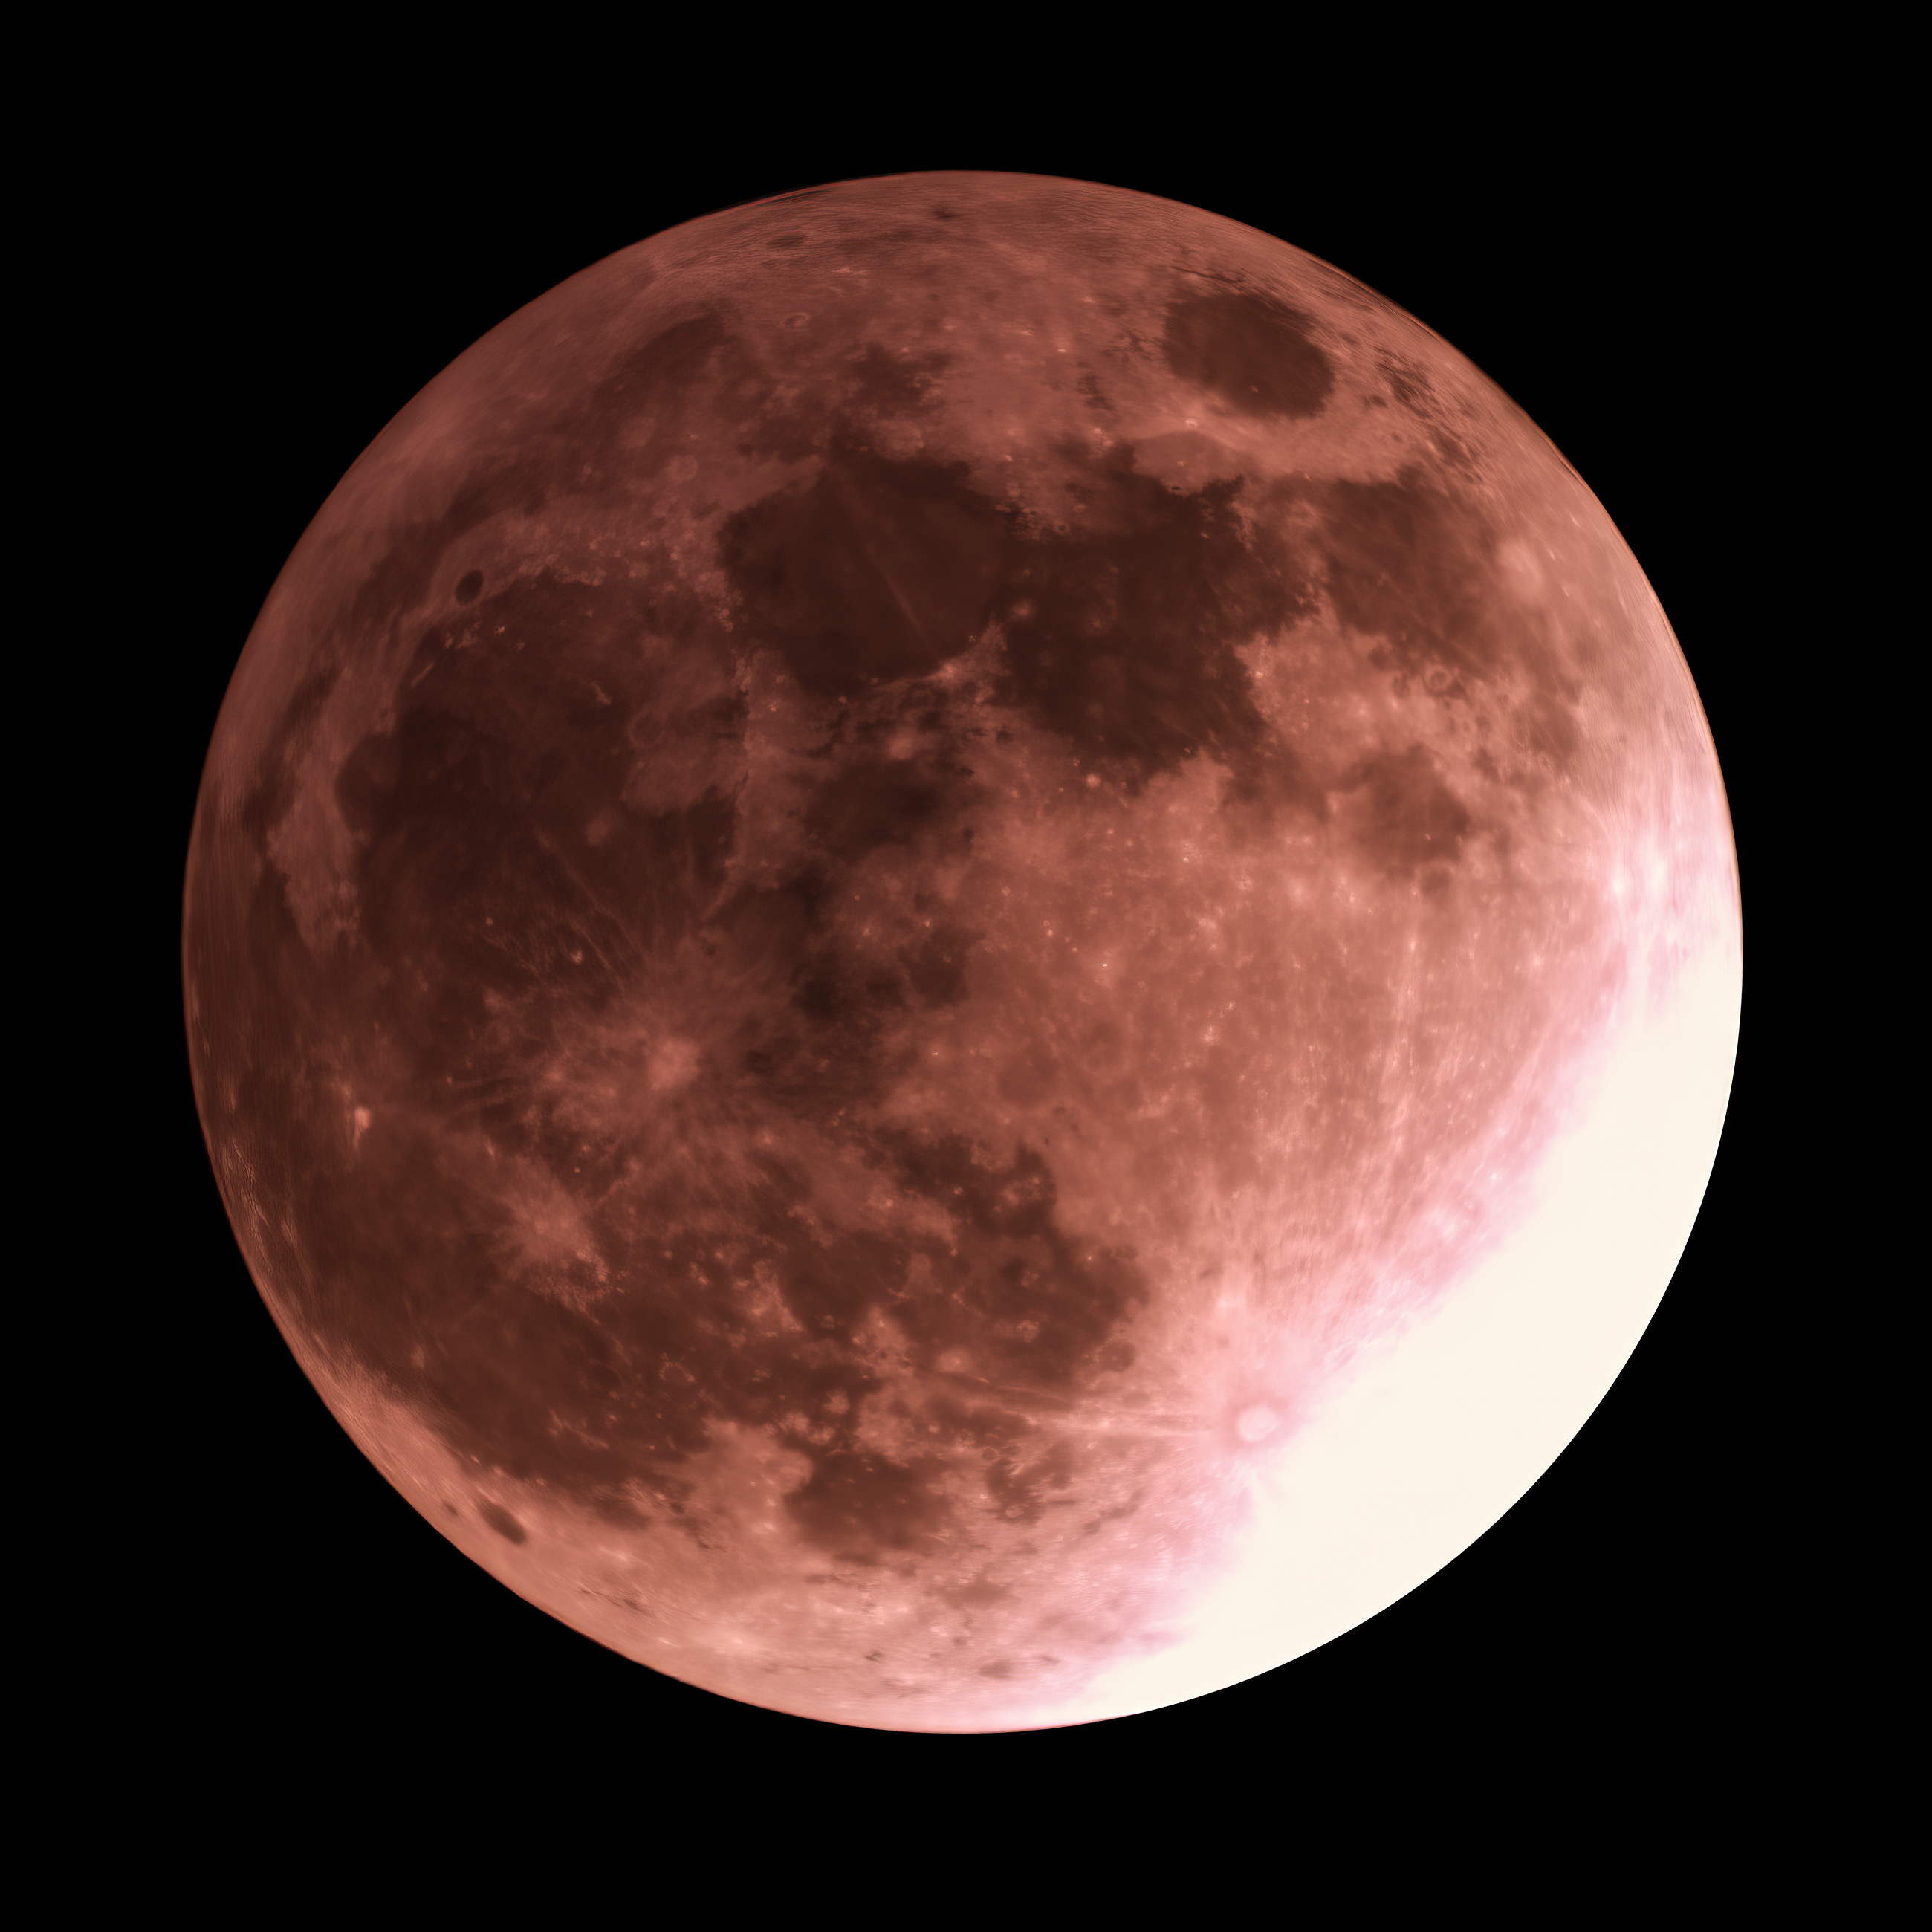 File:Full moon.png - Wikimedia Commons